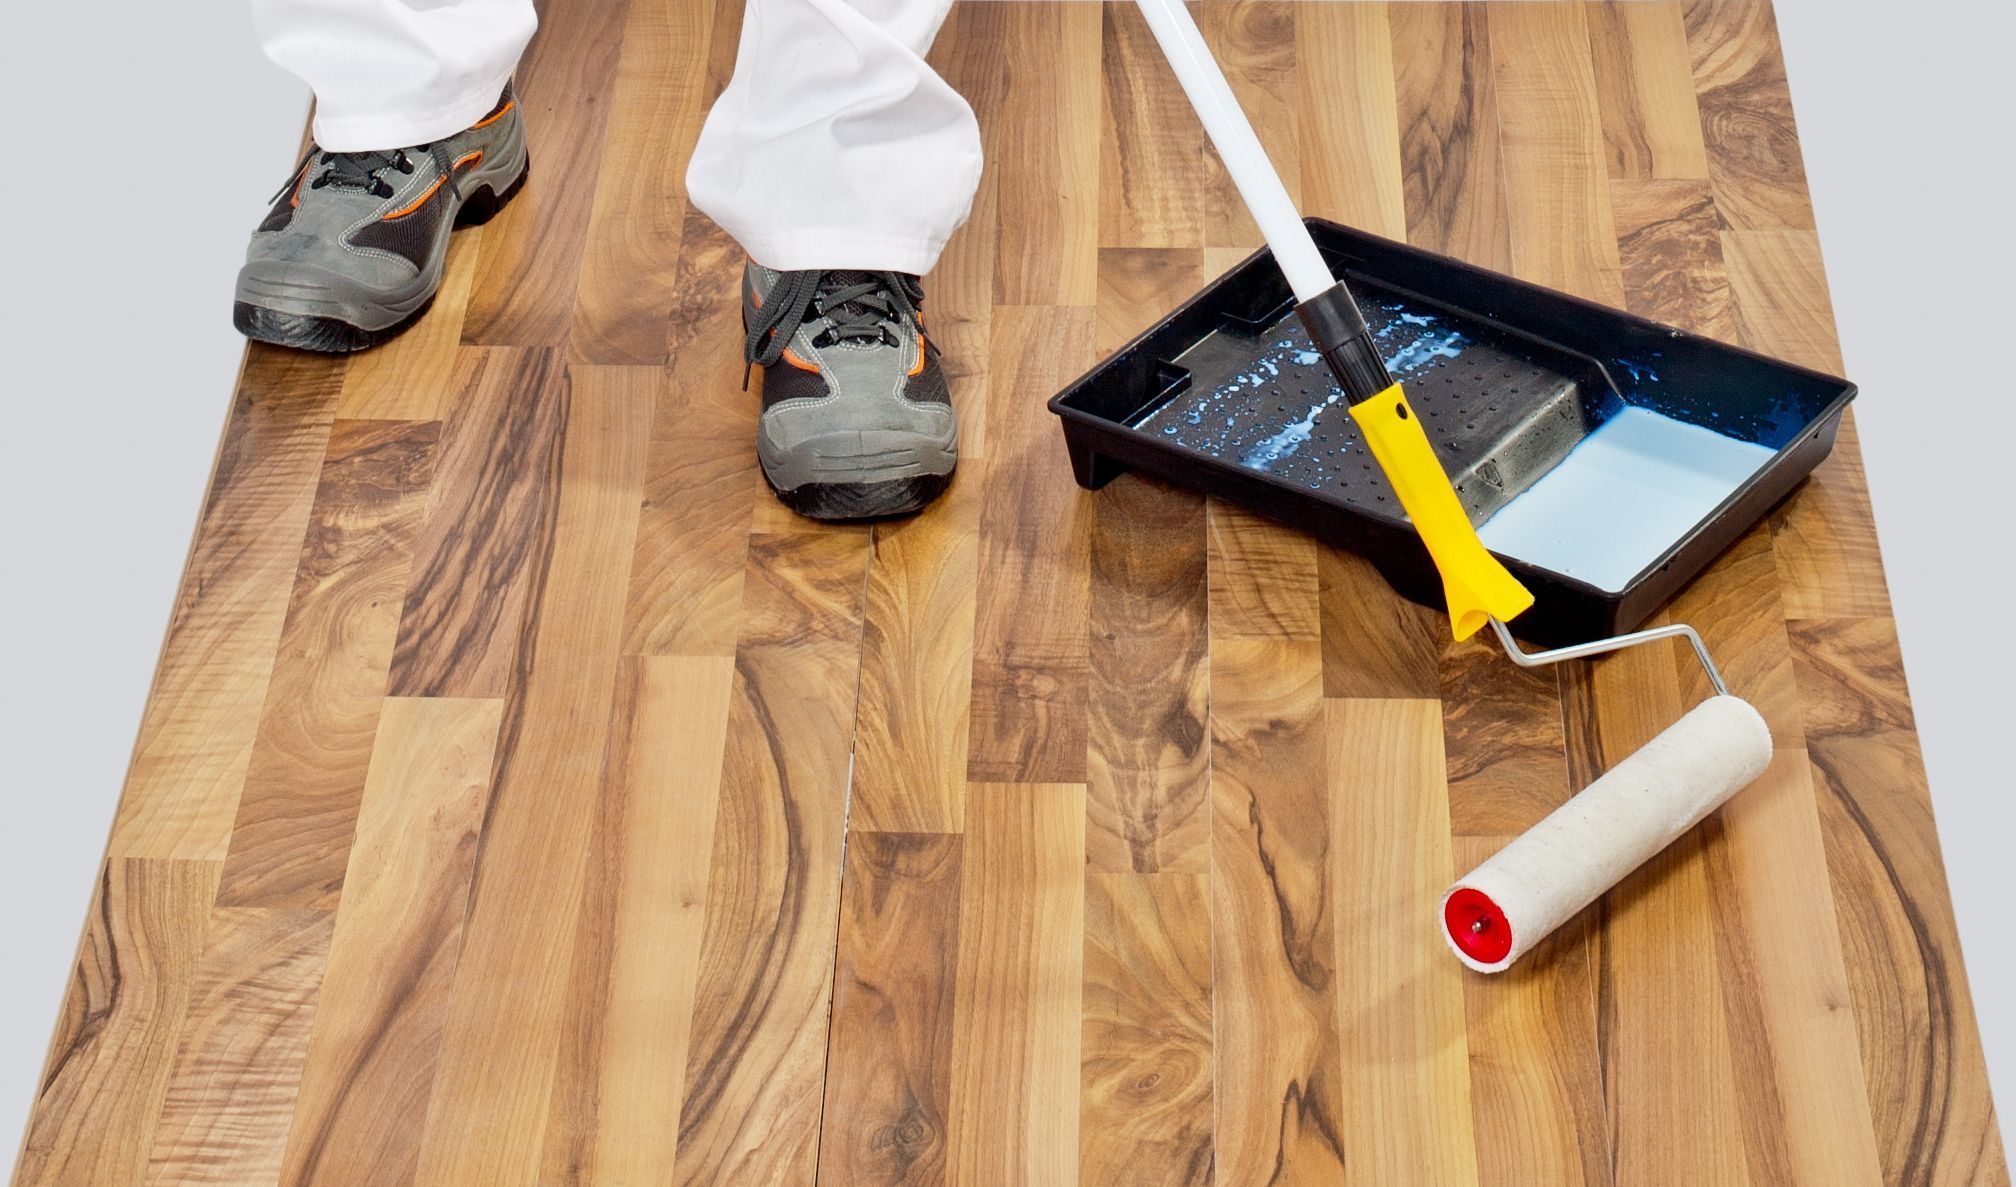 Wood Flooring Be Oiled, Best Way To Condition Hardwood Floors